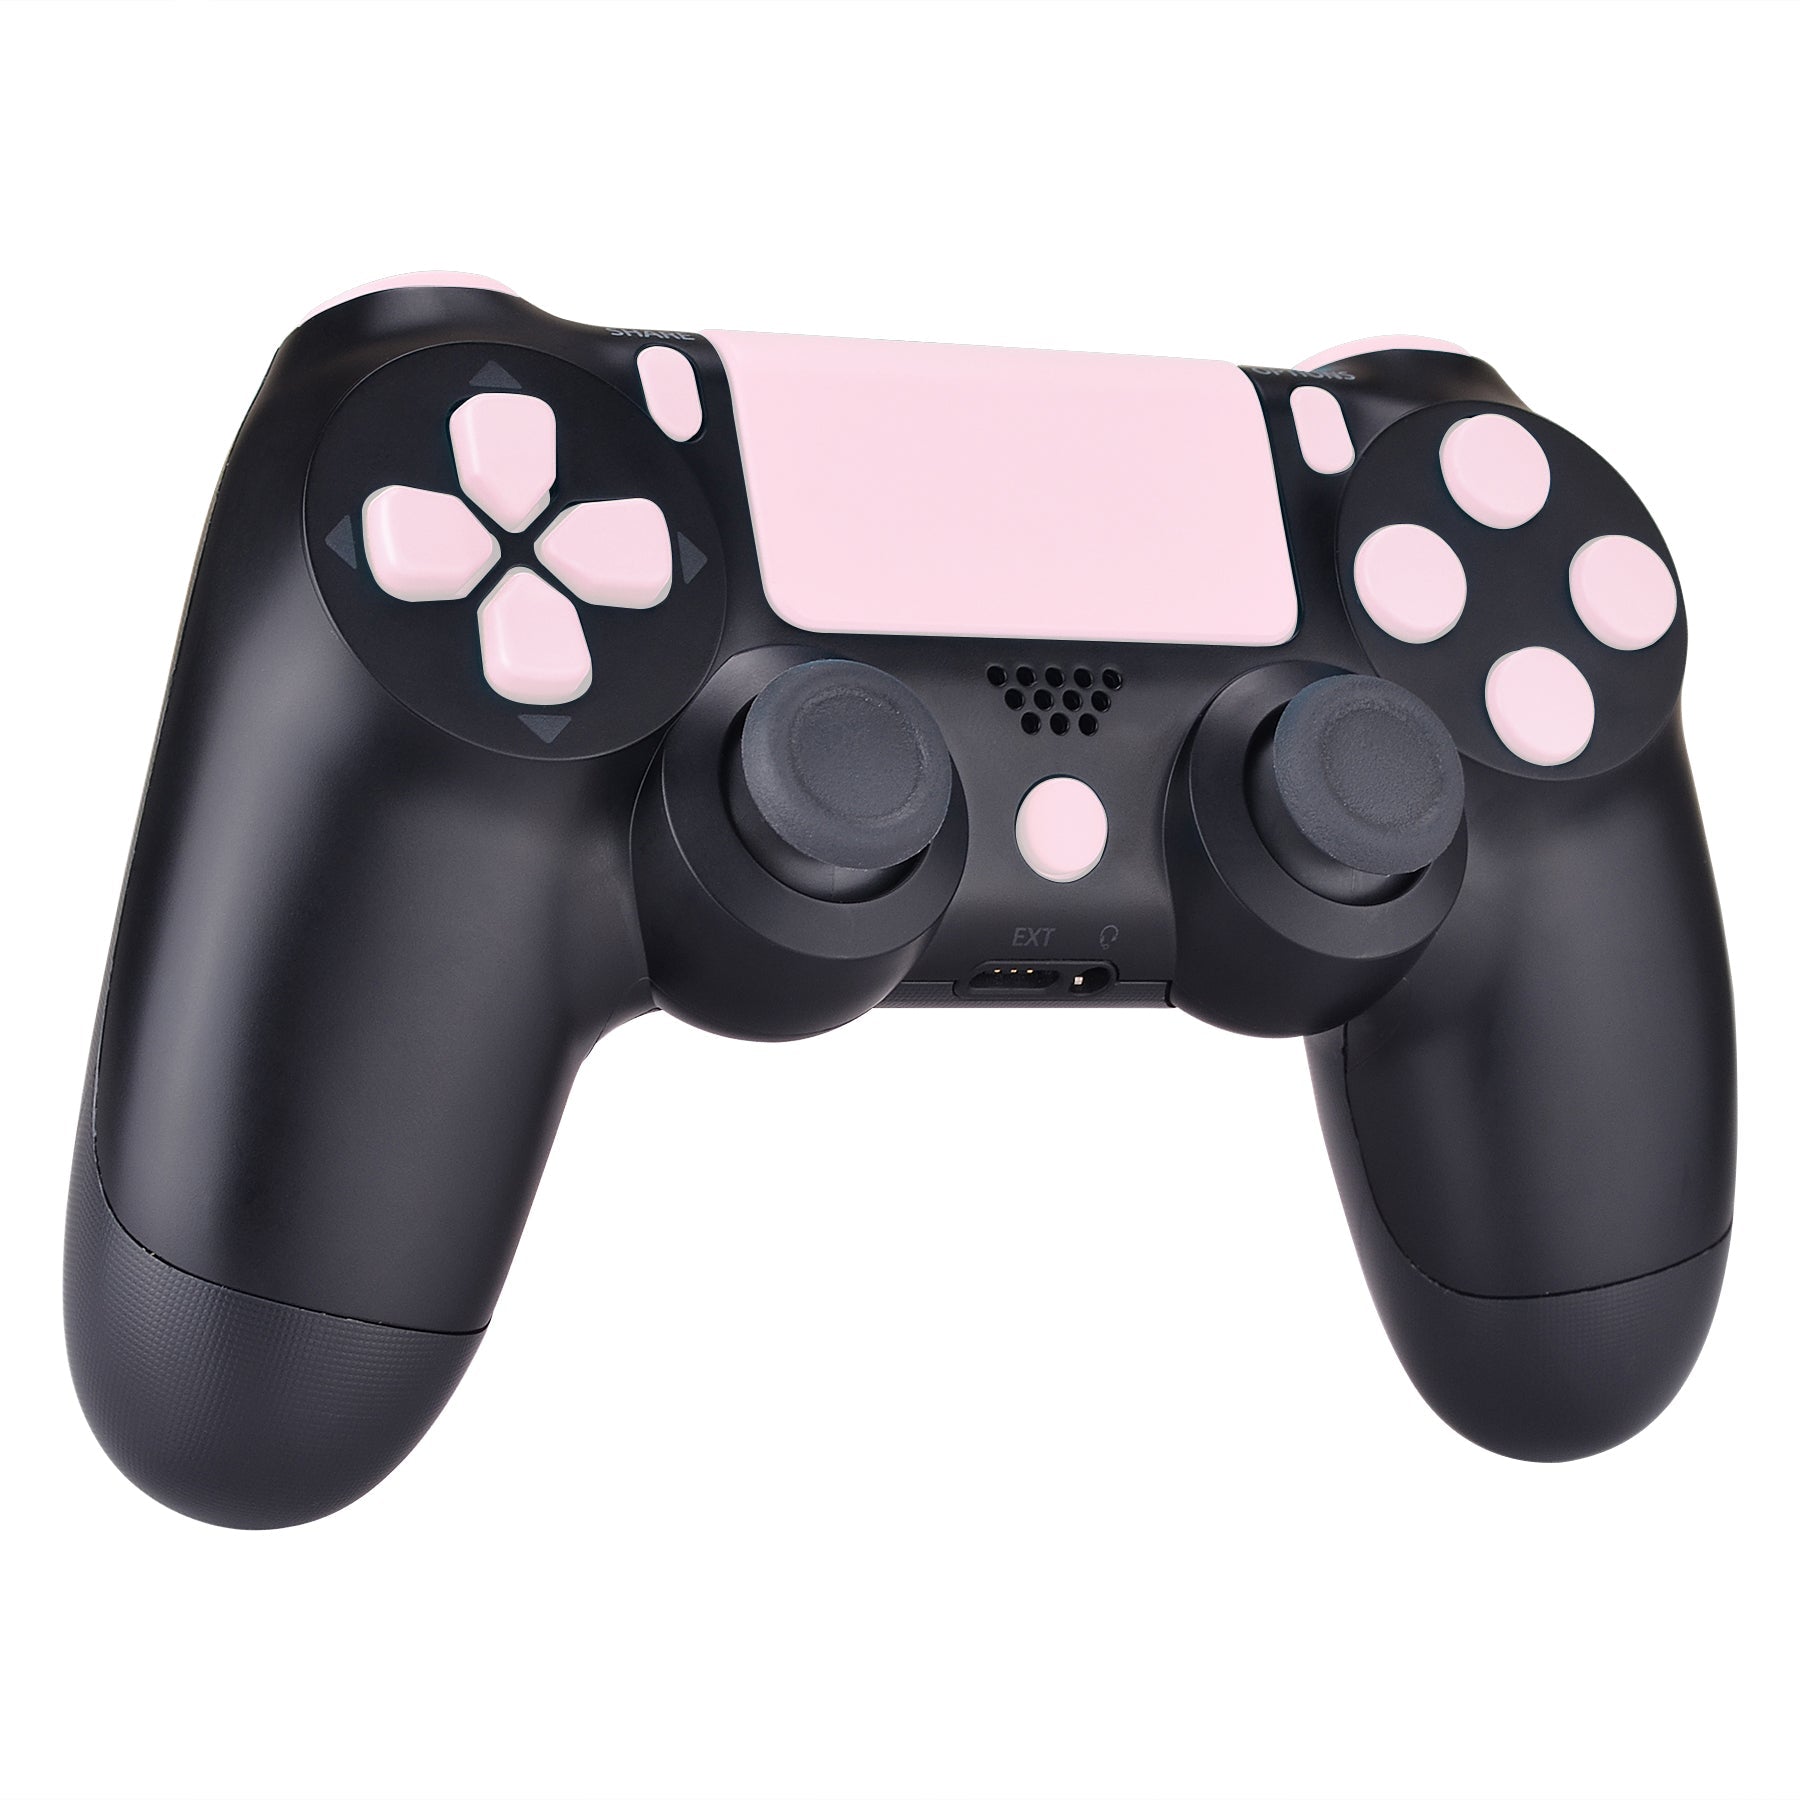 Action eXtremeRate D-pad – Home Buttons Options Slim L1 R1 Buttons Replacement Repair ps4 Blossoms eXtremeRate Triggers Share Kit L2 for Controller, Controller ps4 Pro Set Cherry for Pink Touchpad R2 Full